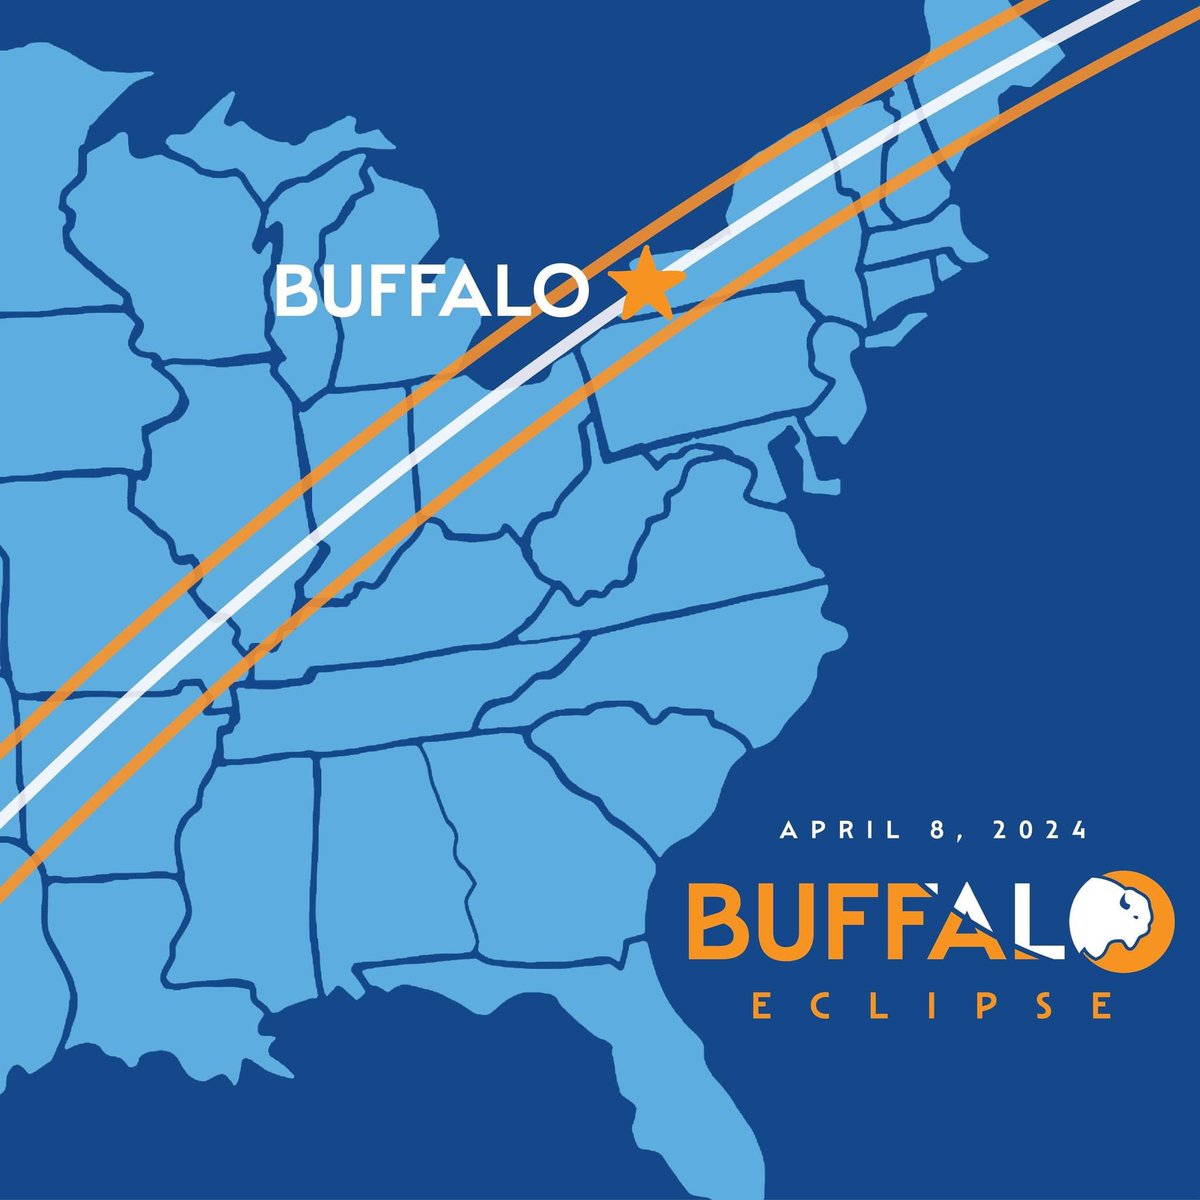 Happy Eclipse Day, Buffalo! ☀️🦬🌘 While thousands of people across the region cross their fingers🤞 for ideal viewing weather conditions, if you’re still looking for something to do, check out our top and 50+ events listed at EclipseInTheBUF.com!